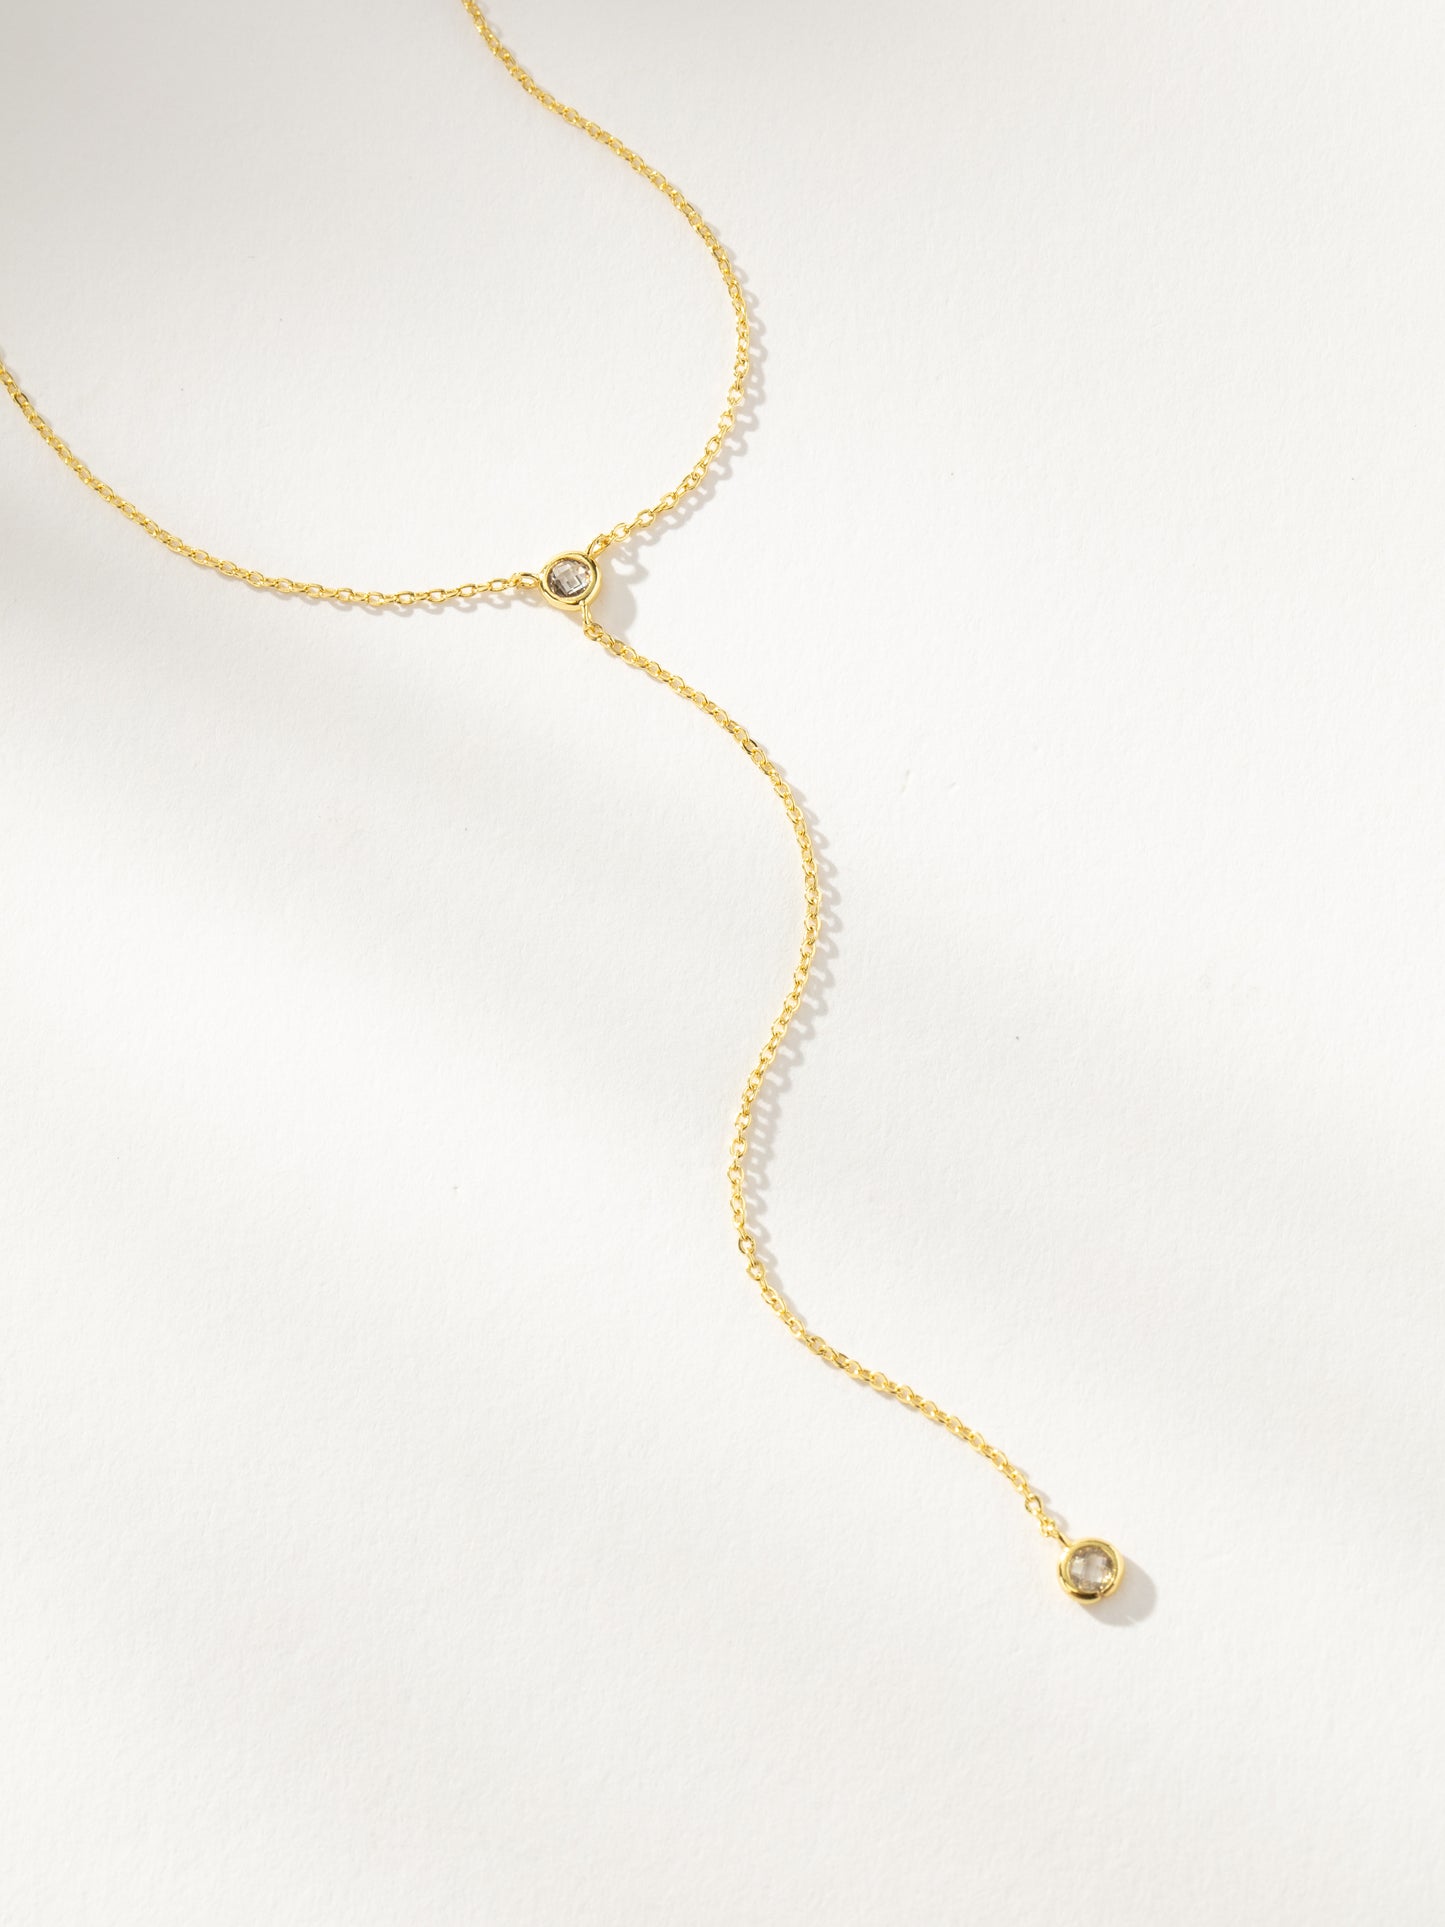 Little Things Lariat Necklace | Gold | Product Detail Image | Uncommon James